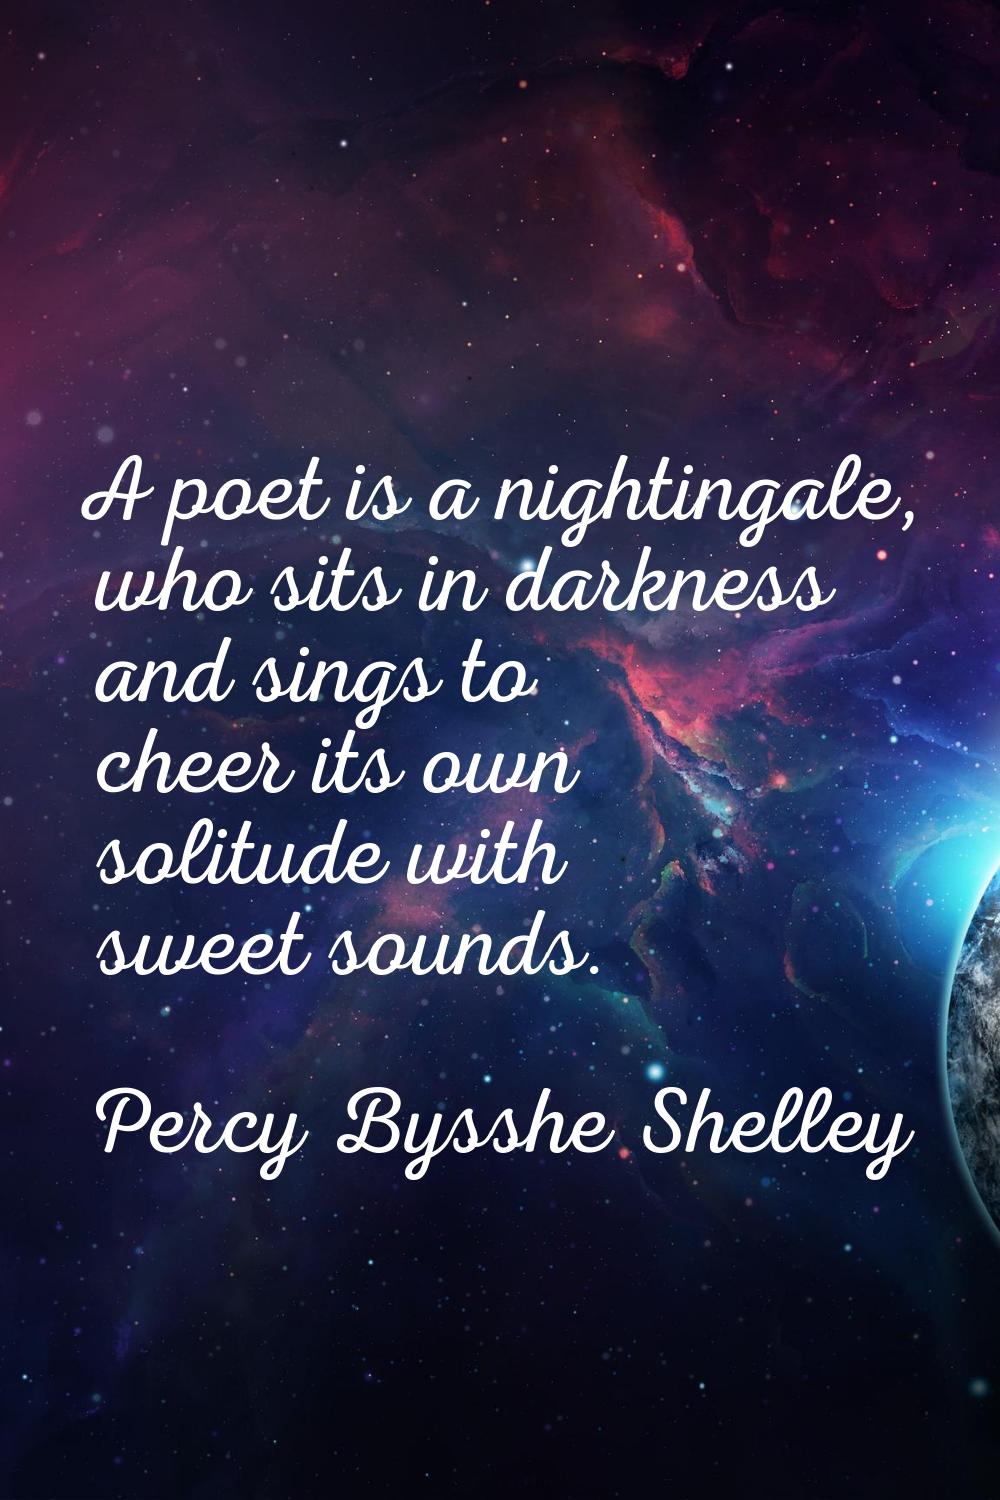 A poet is a nightingale, who sits in darkness and sings to cheer its own solitude with sweet sounds